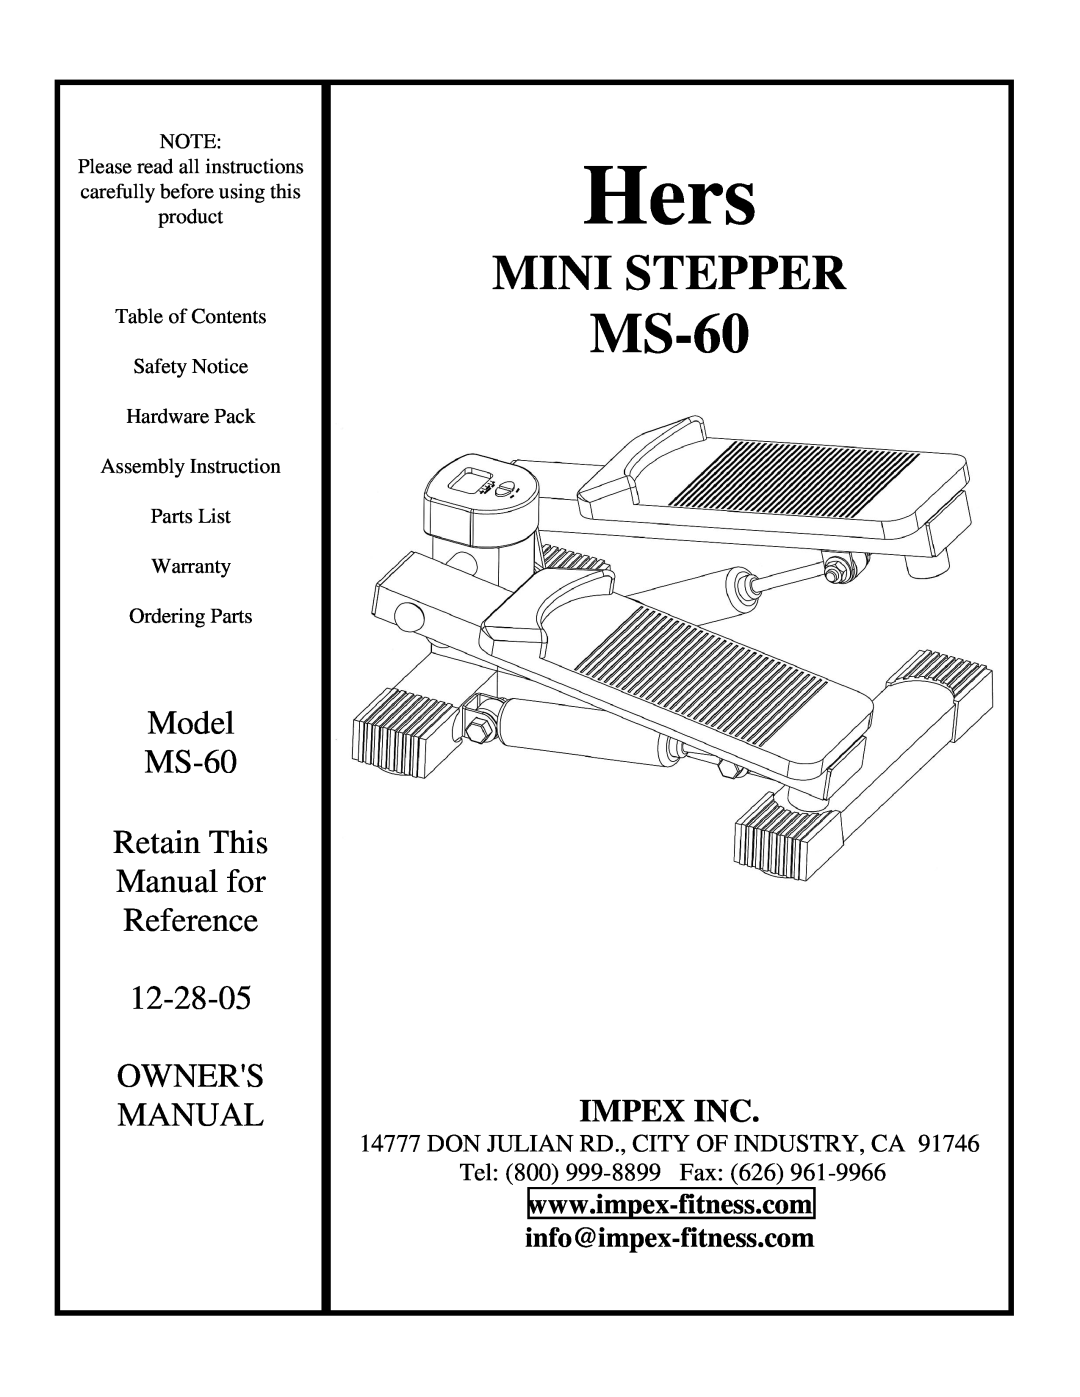 Impex MS-60 manual info@impex-fitness.com, Hers, Mini Stepper, Model, Retain This, Manual for, Reference, Owners, 12-28-05 